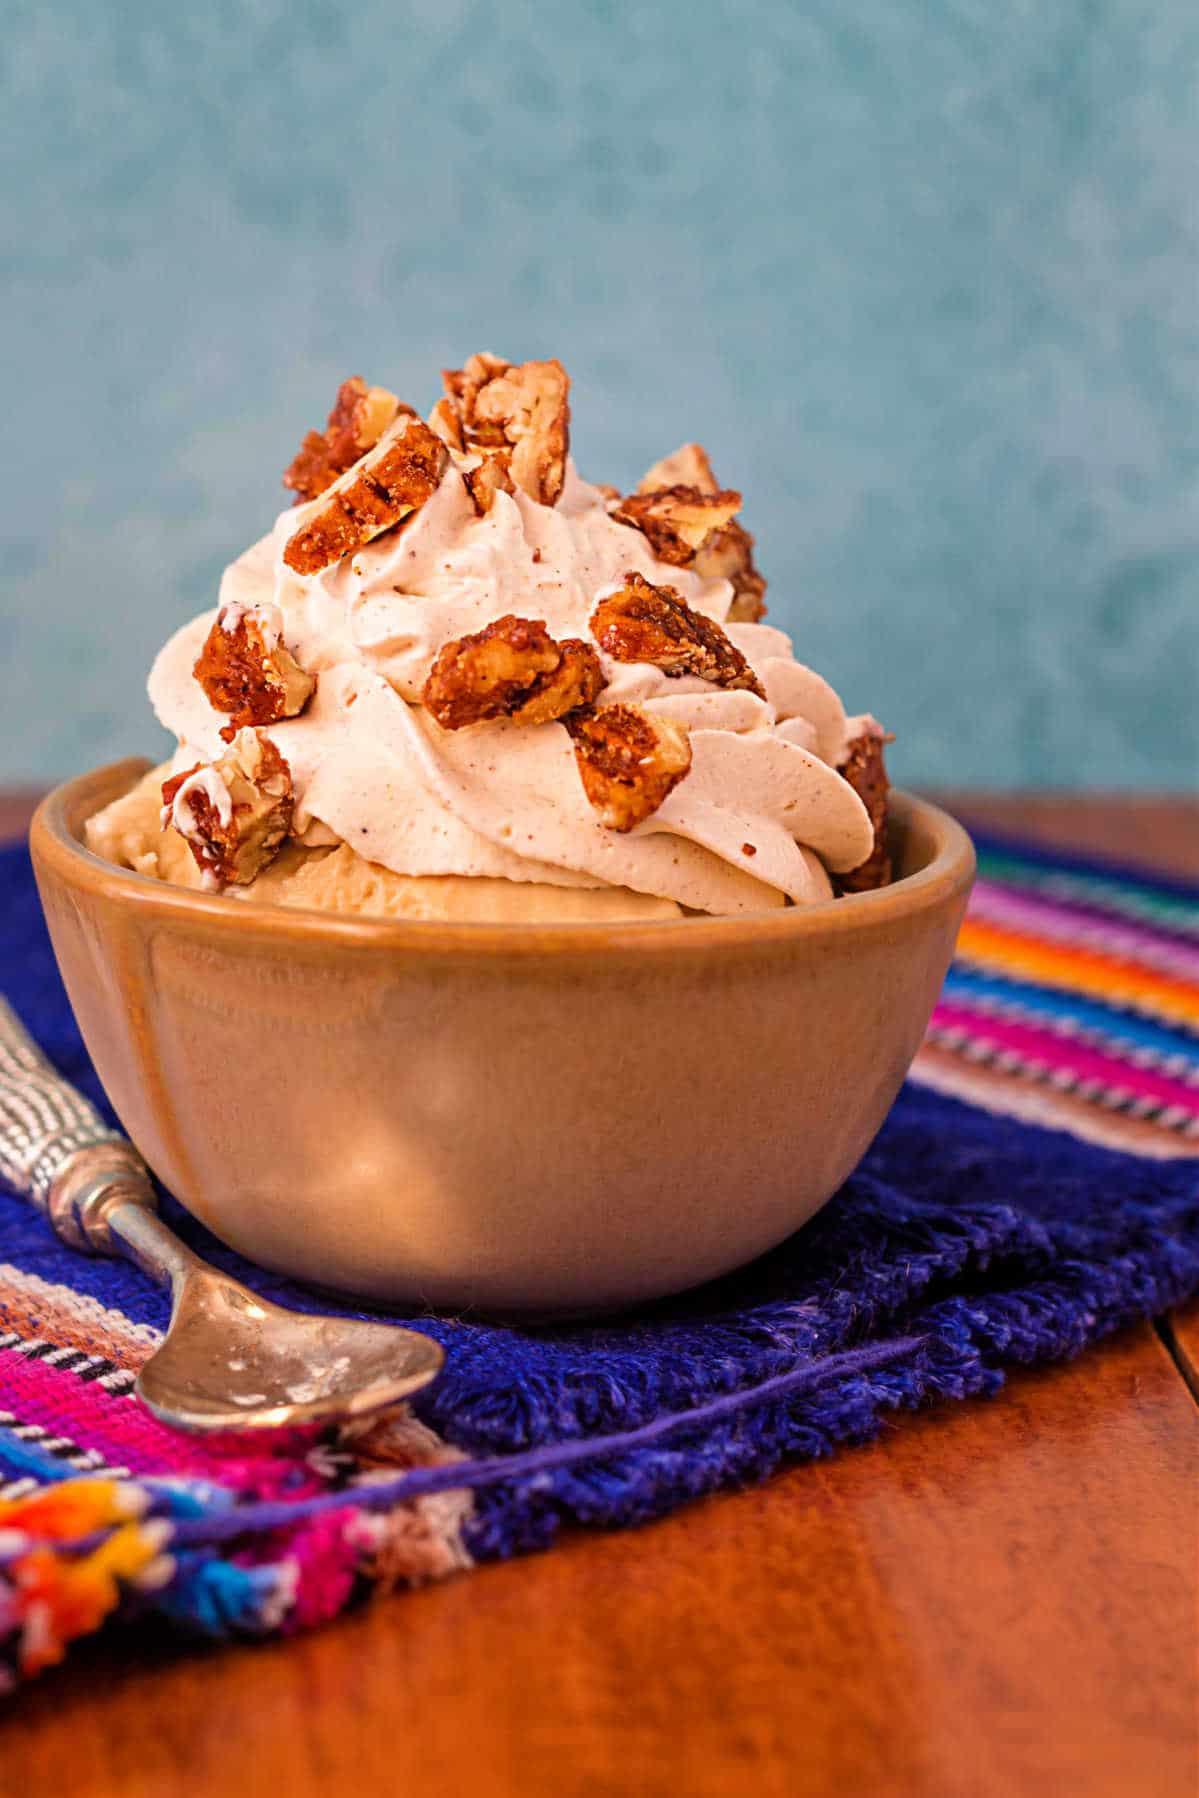 An ice cream sundae in a beige dish topped with spiced whipped cream and chopped cinnamon glazed nuts.